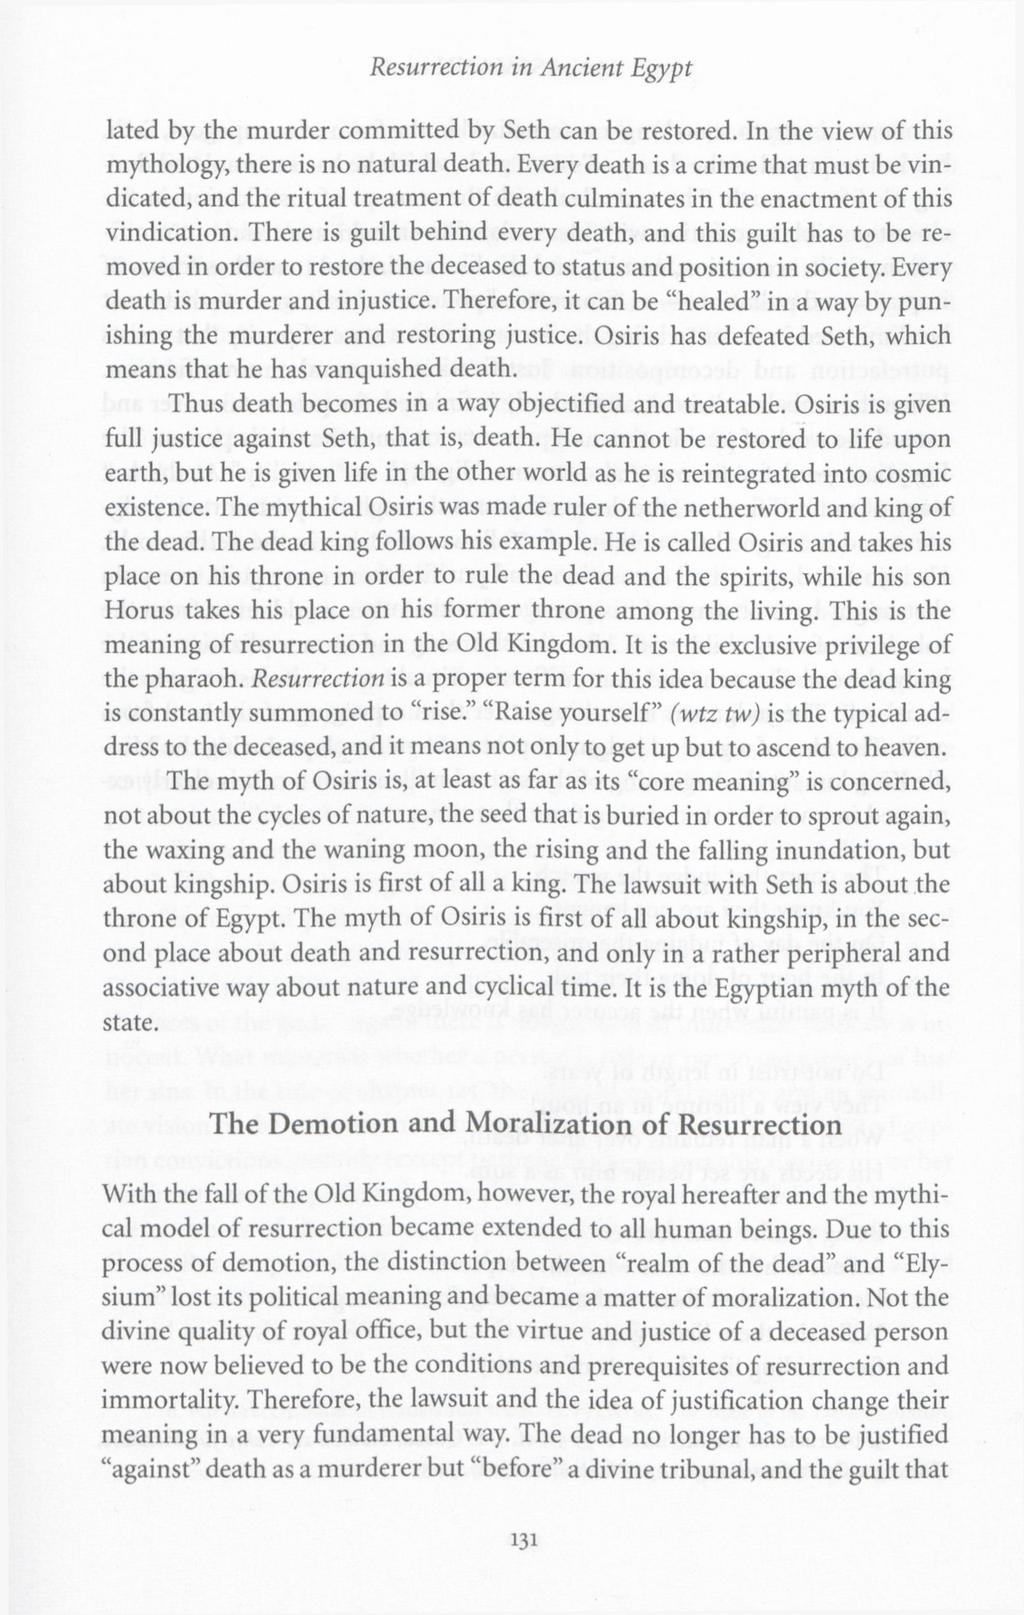 Resurrection in Ancient Egypt lated by the murder committed by Seth can be restored. In the view of this mythology, there is no natural death.